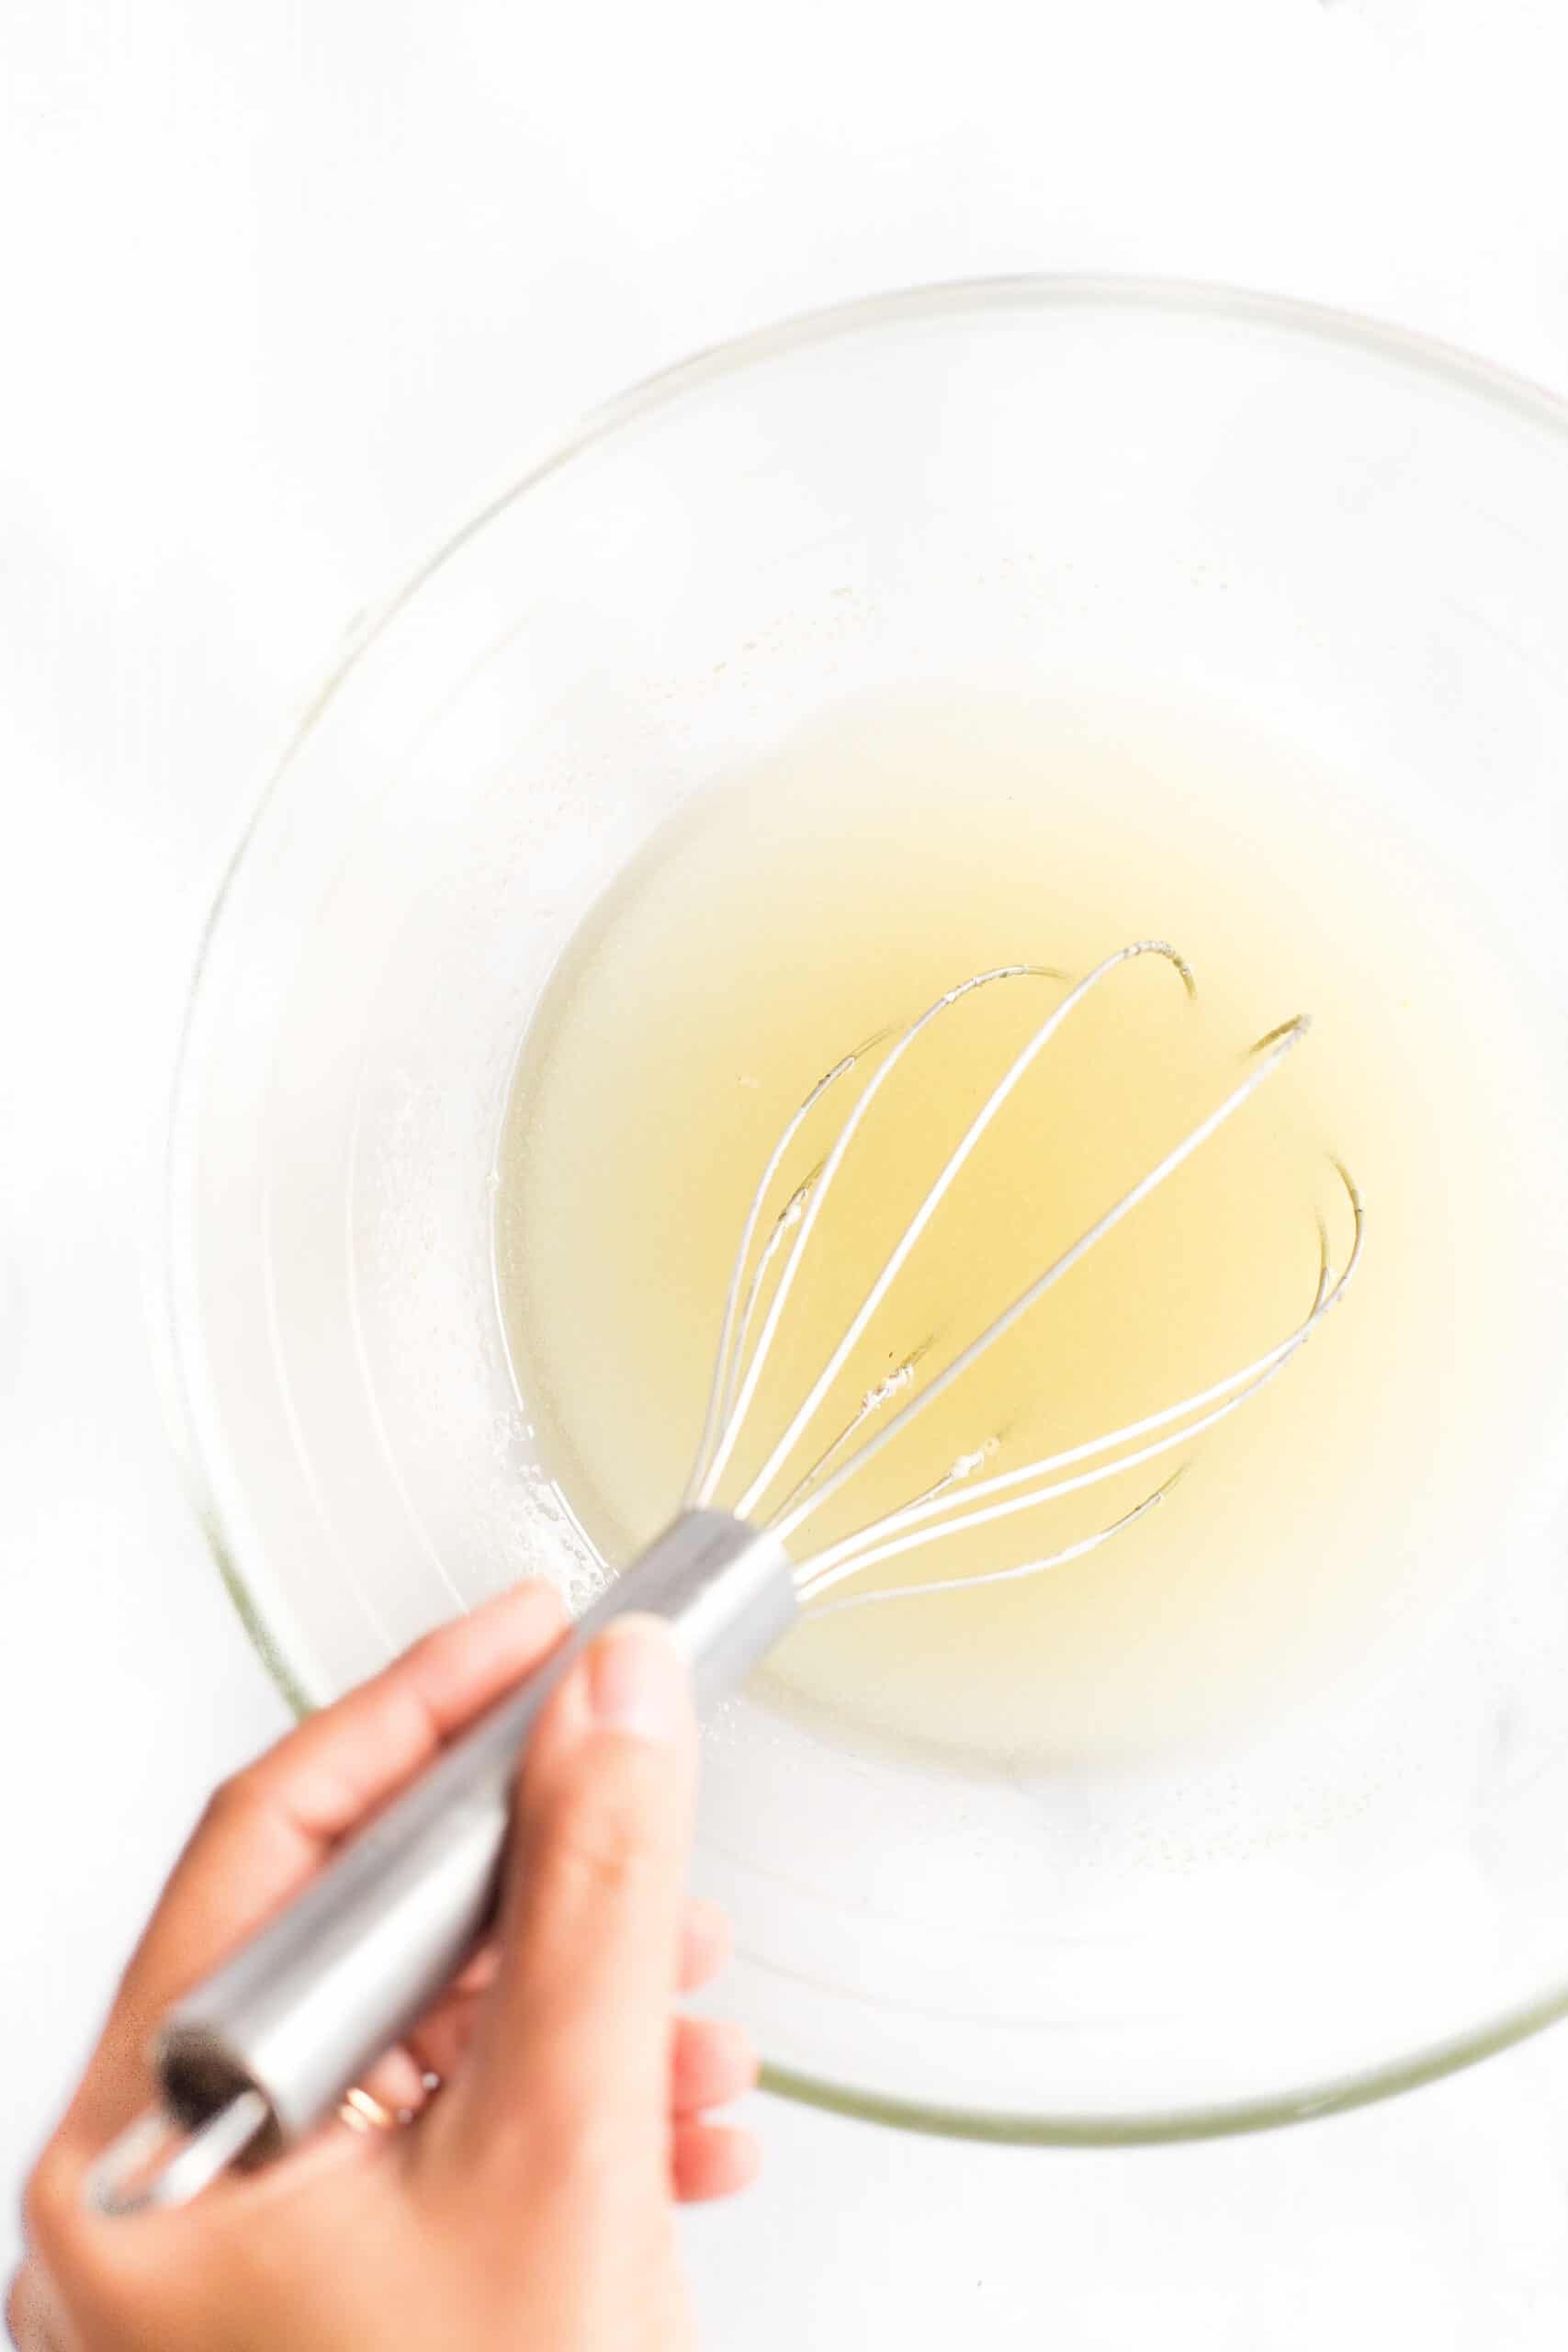 Whisking sugar and oil in a large glass bowl.